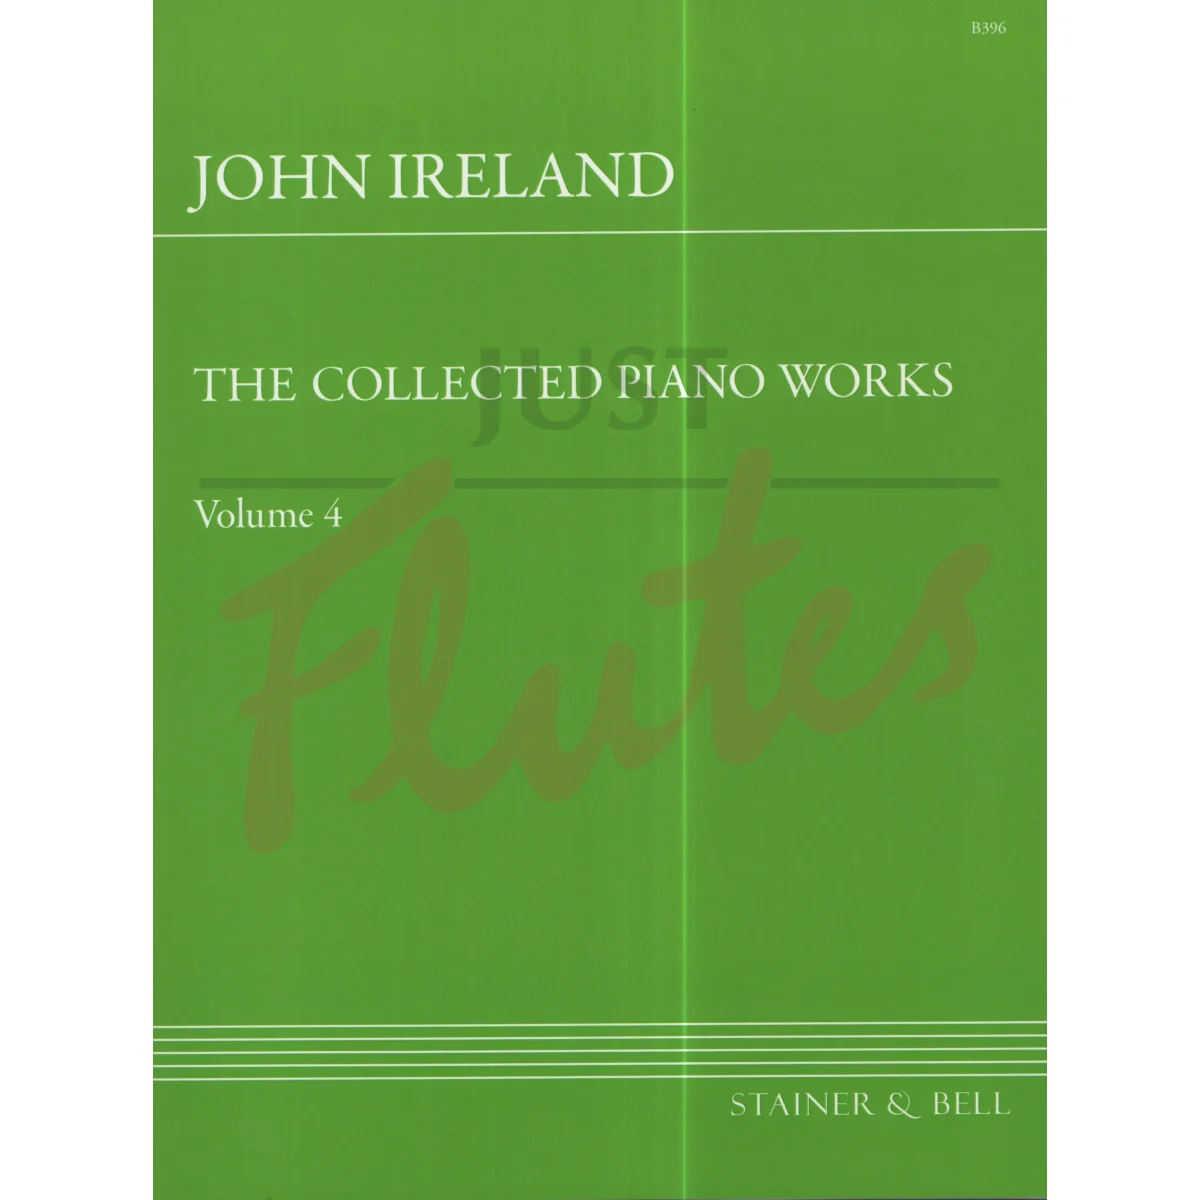 The Collected Piano Works Volume 4